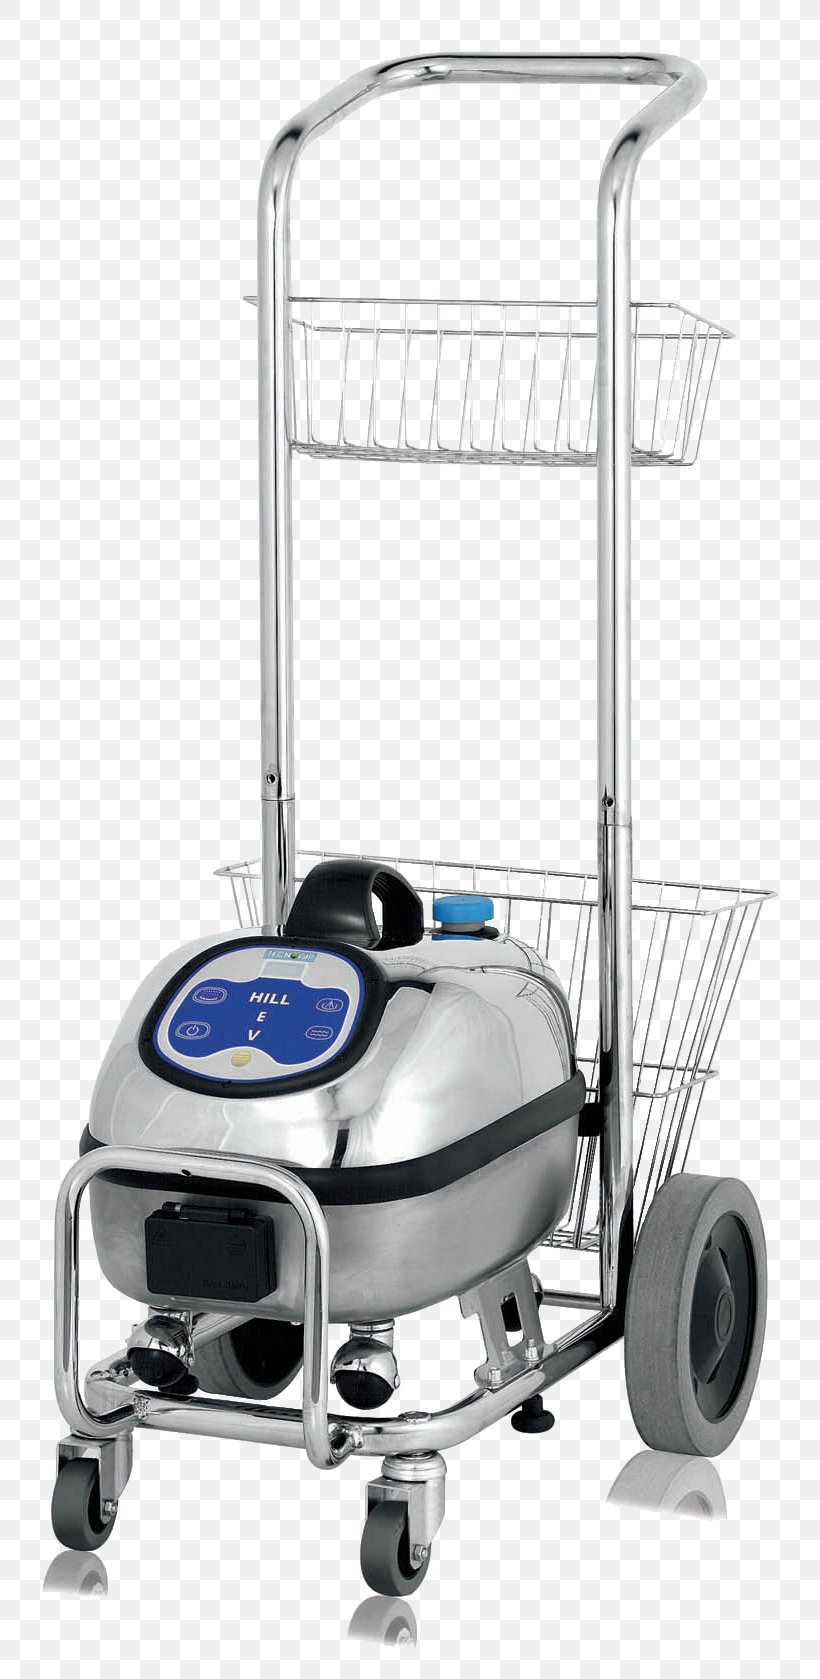 Vacuum Cleaner Vapor Steam Cleaner Tecnovap Evaporating Dish Steam Generator, PNG, 800x1679px, Vacuum Cleaner, Bar, Cleaner, Cleanliness, Disinfectants Download Free